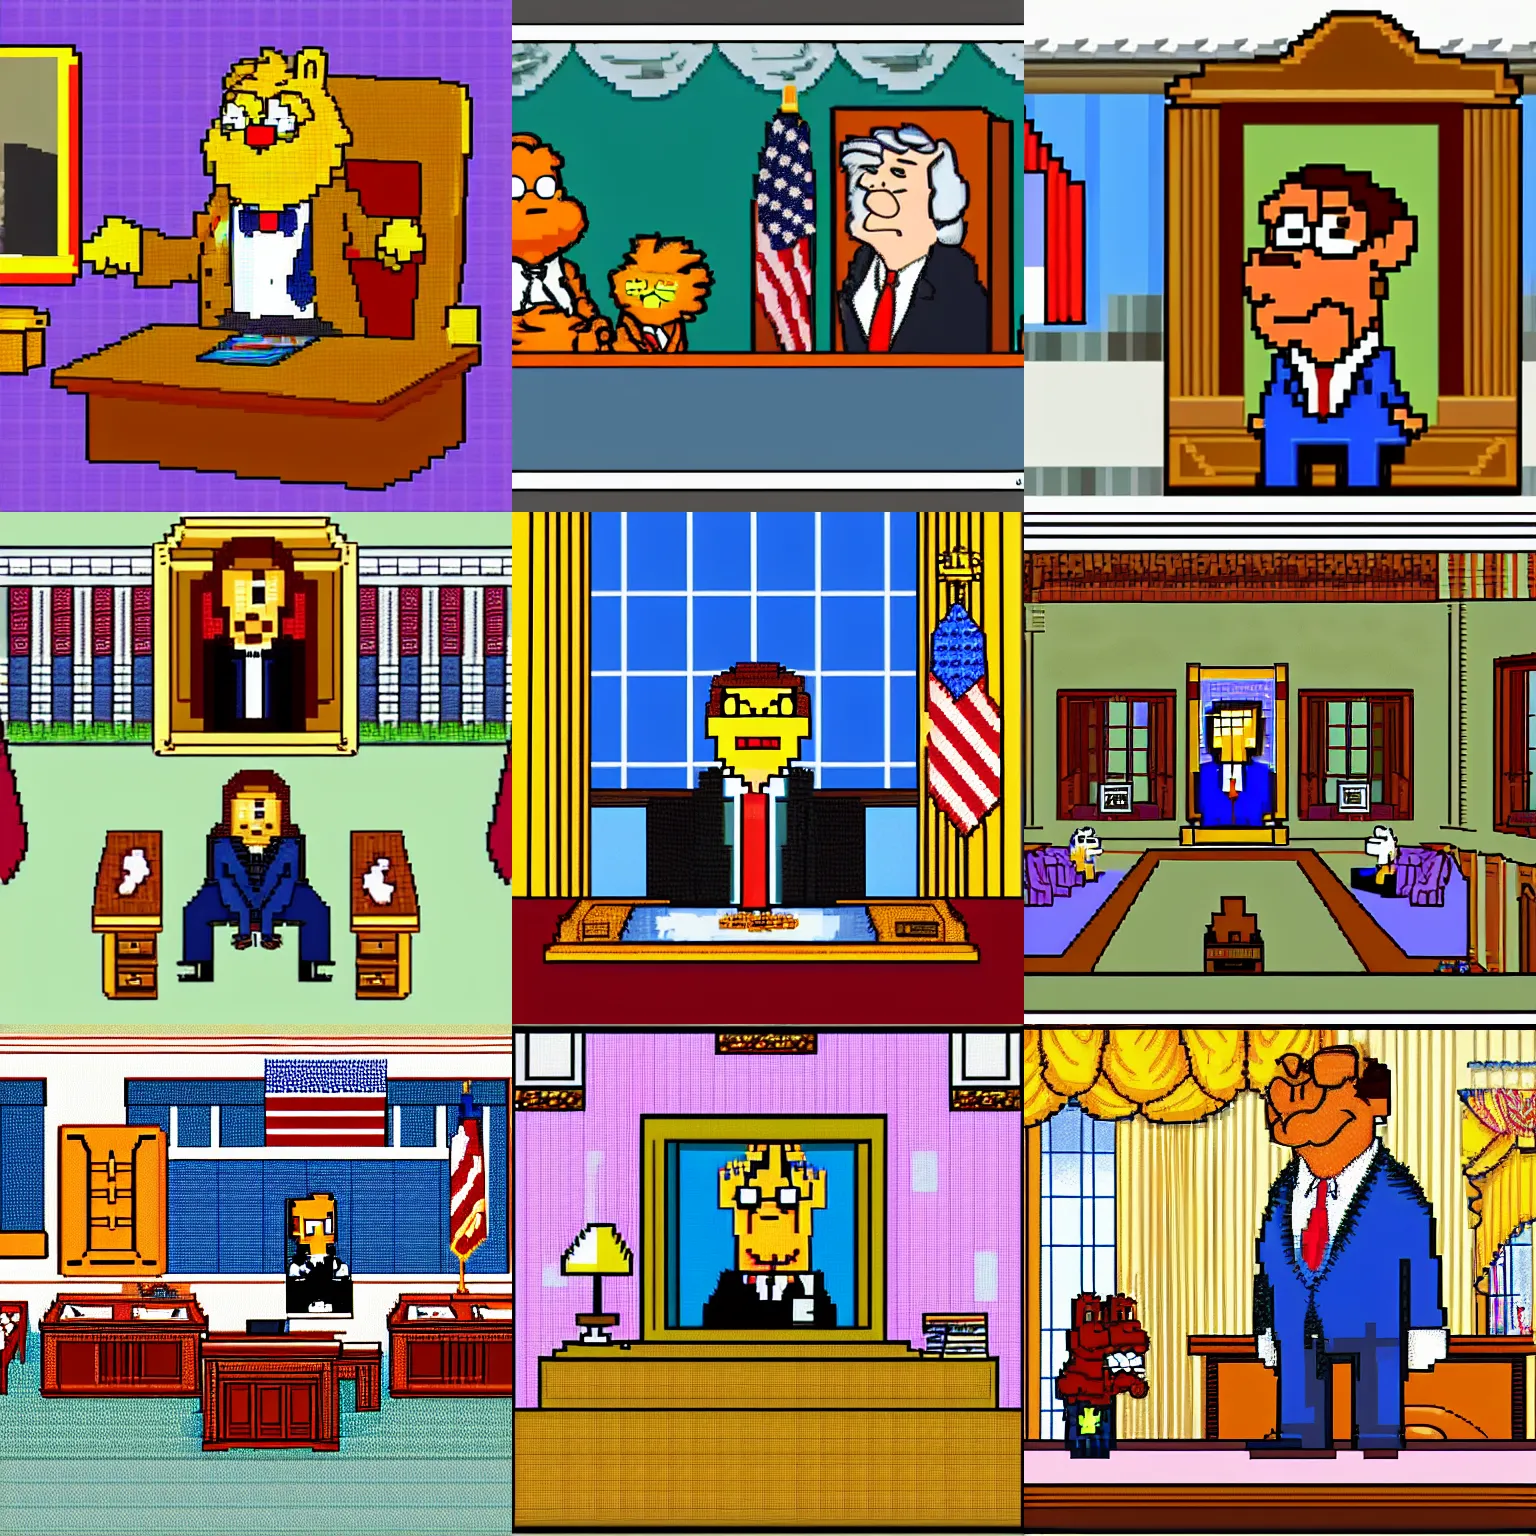 Prompt: Pixel Art of garfield as president in the oval office